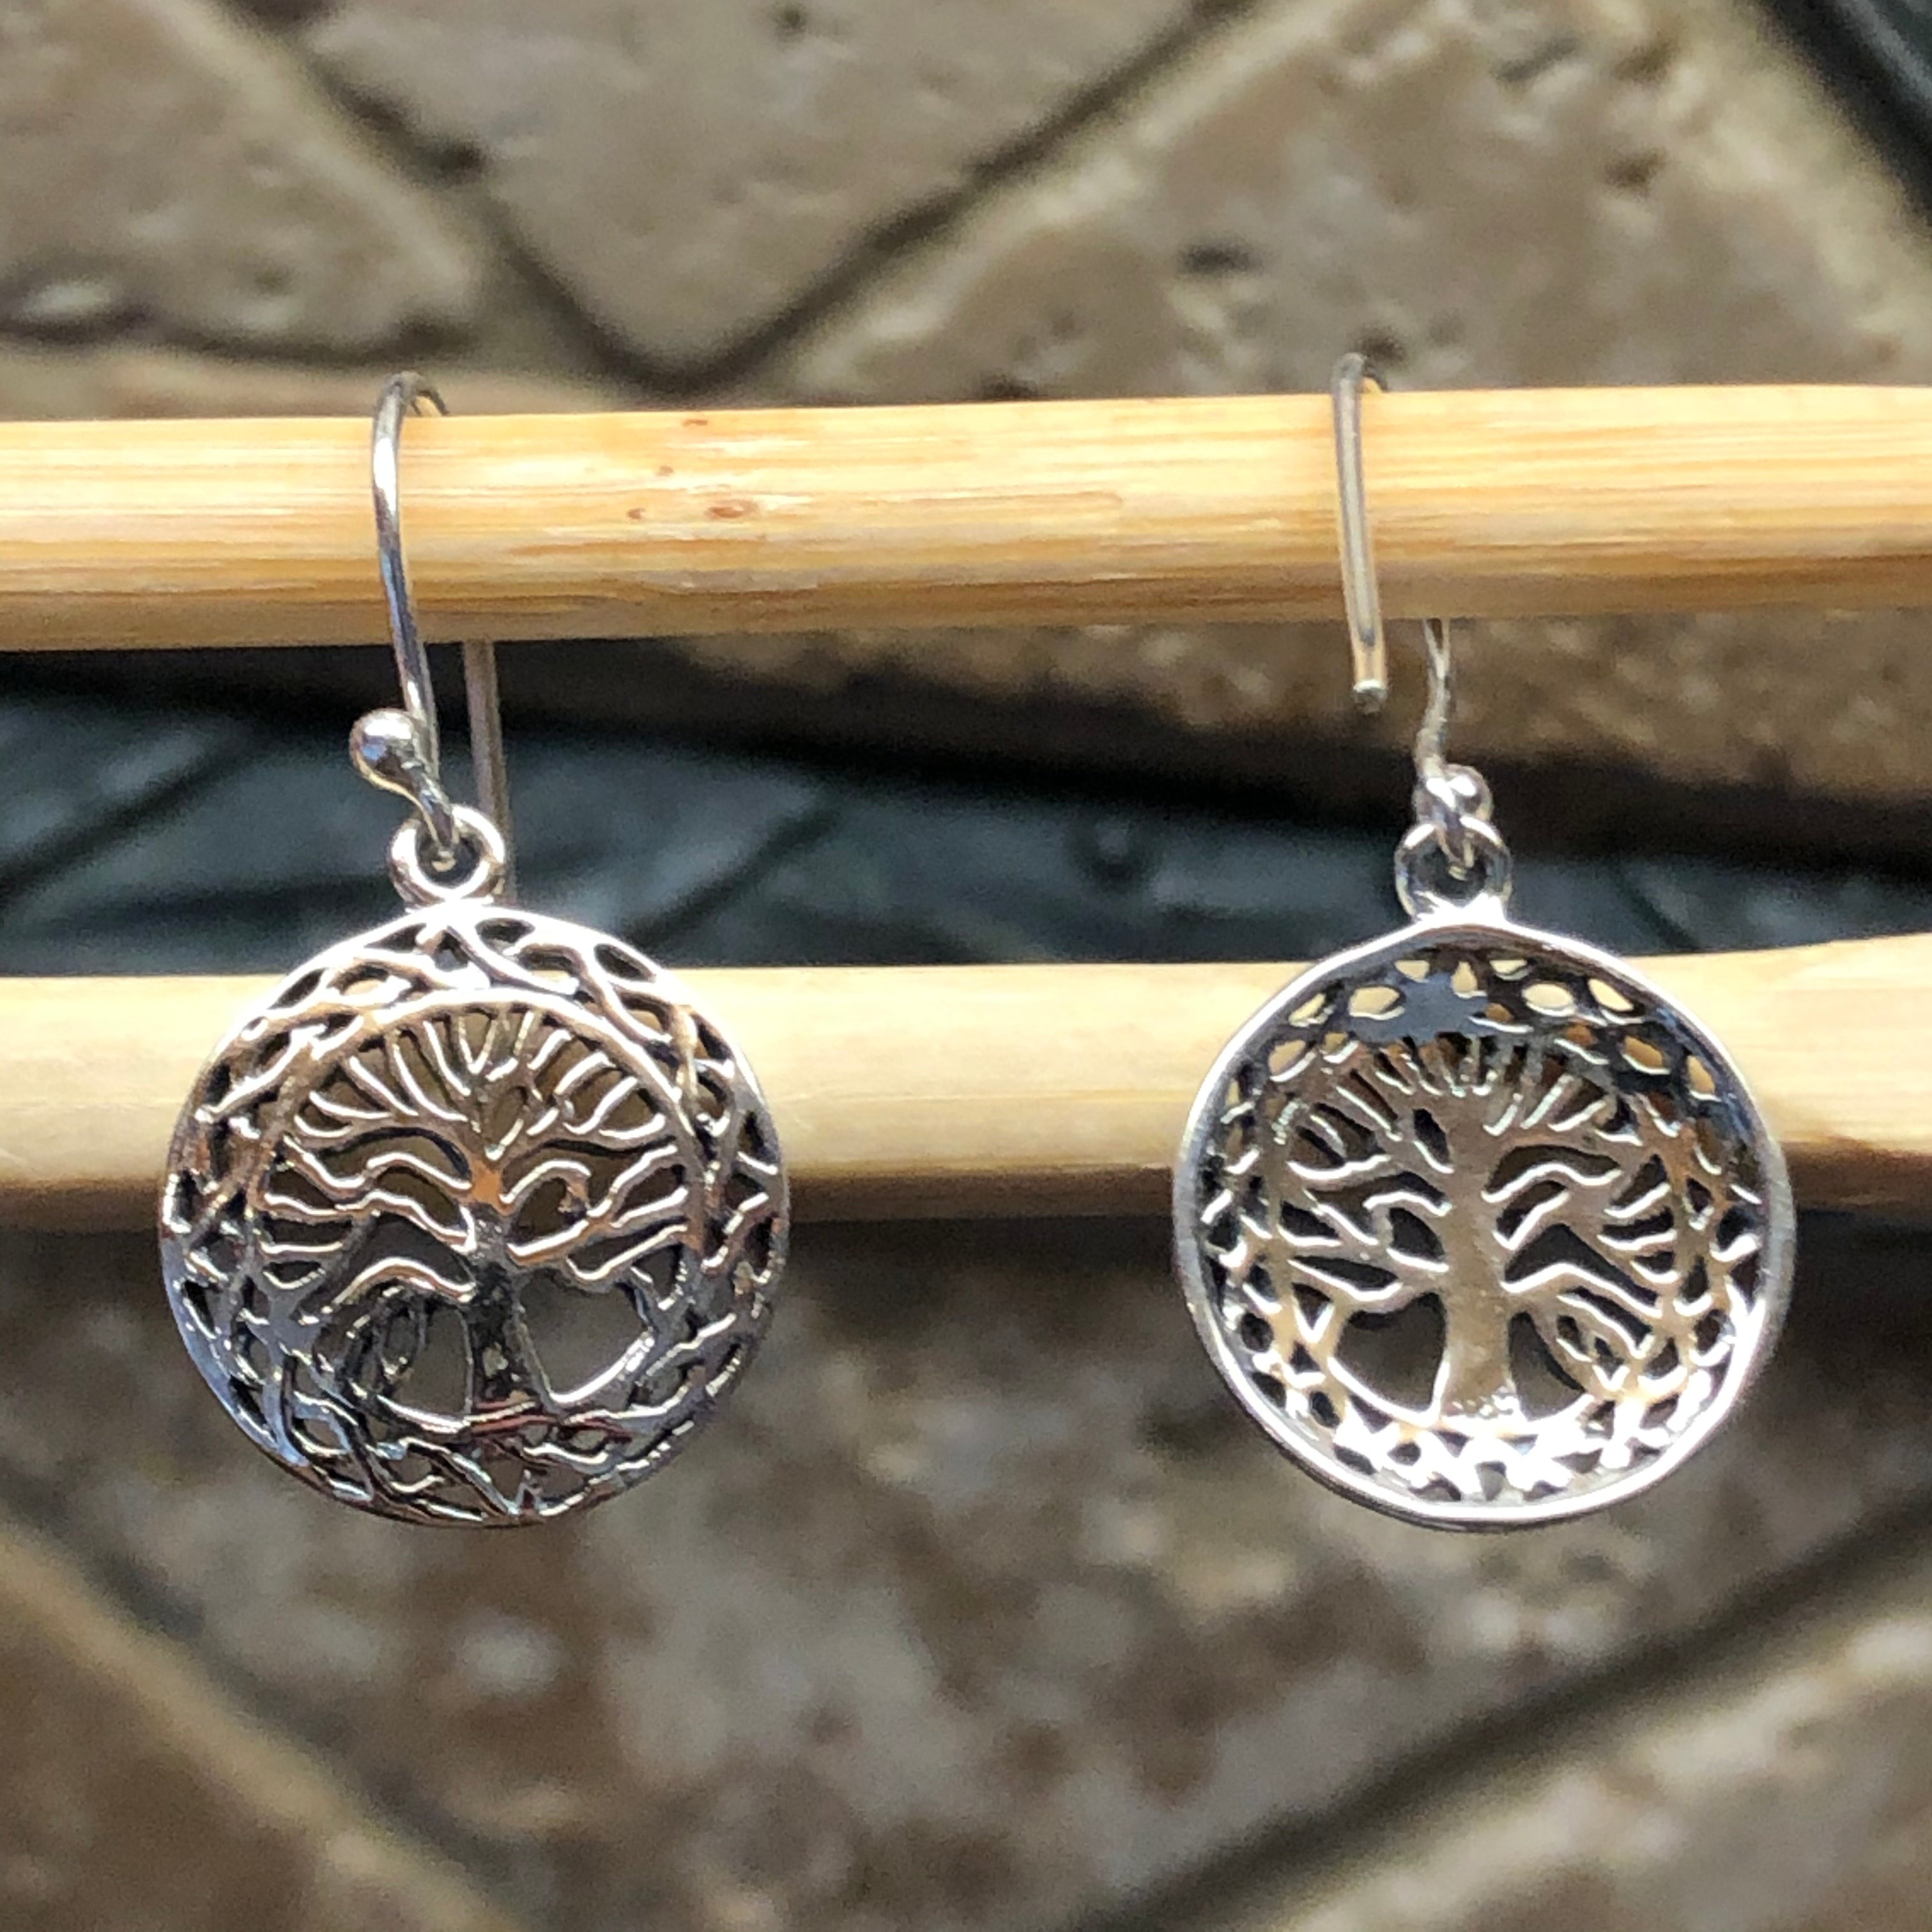 Tree of Life 925 Solid Sterling Silver Earrings 25mm Long - Natural Rocks by Kala